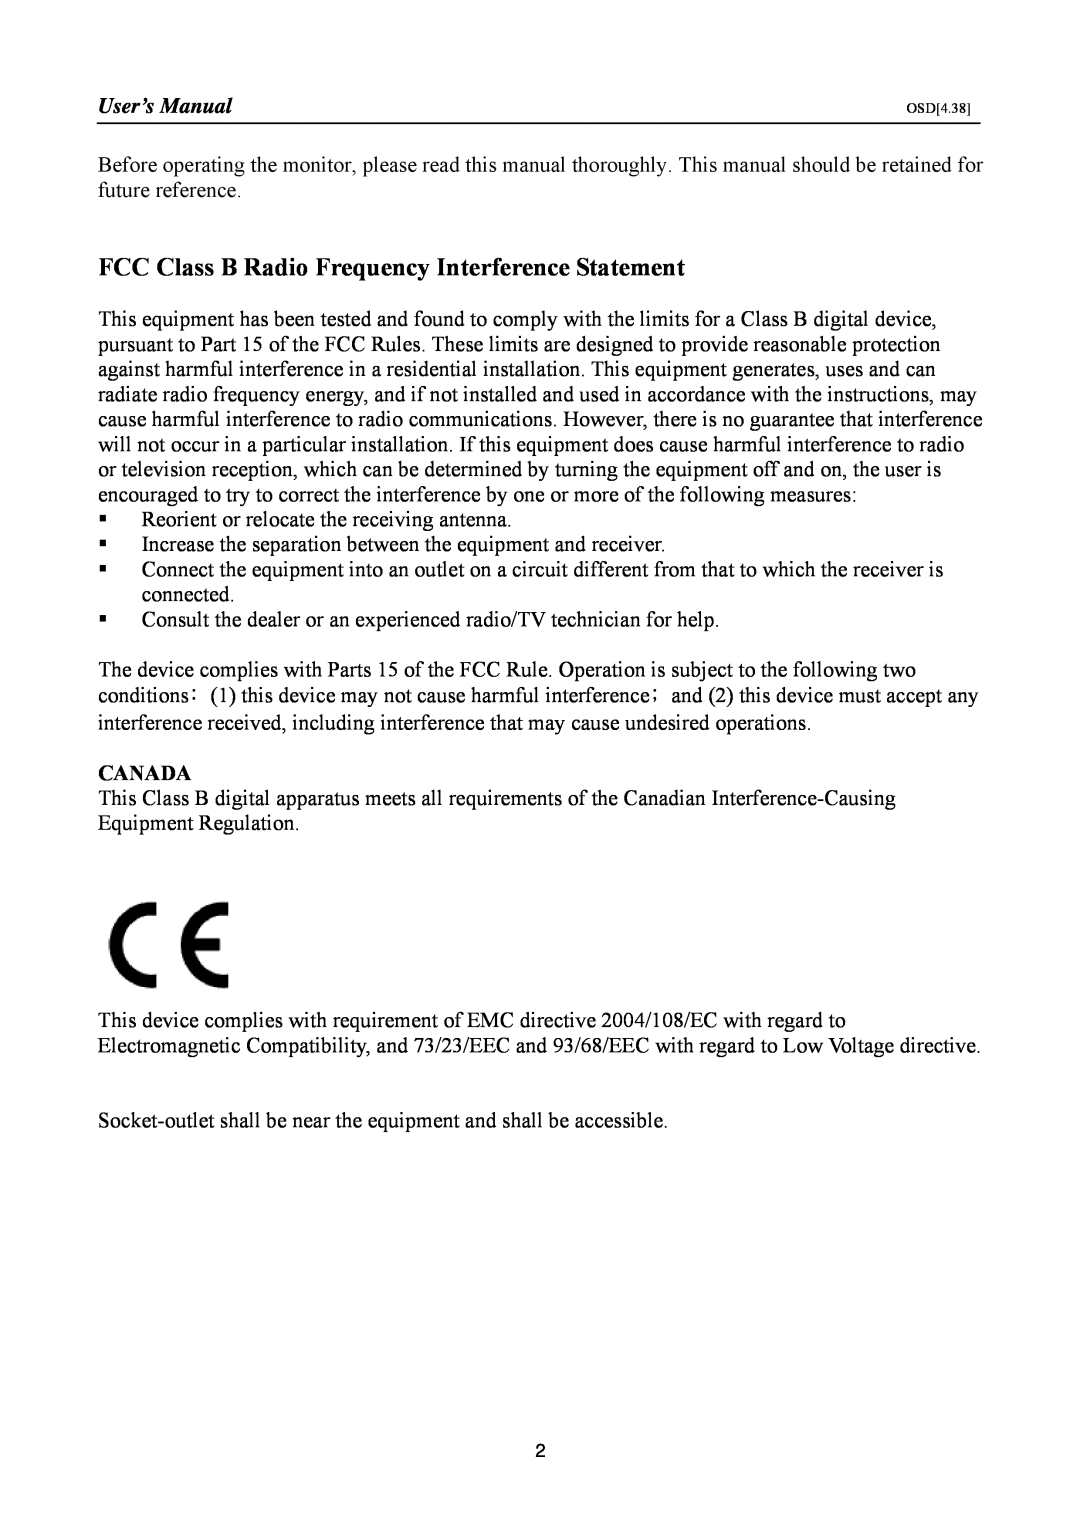 HANNspree SM198 manual FCC Class B Radio Frequency Interference Statement, User’s Manual, Canada 